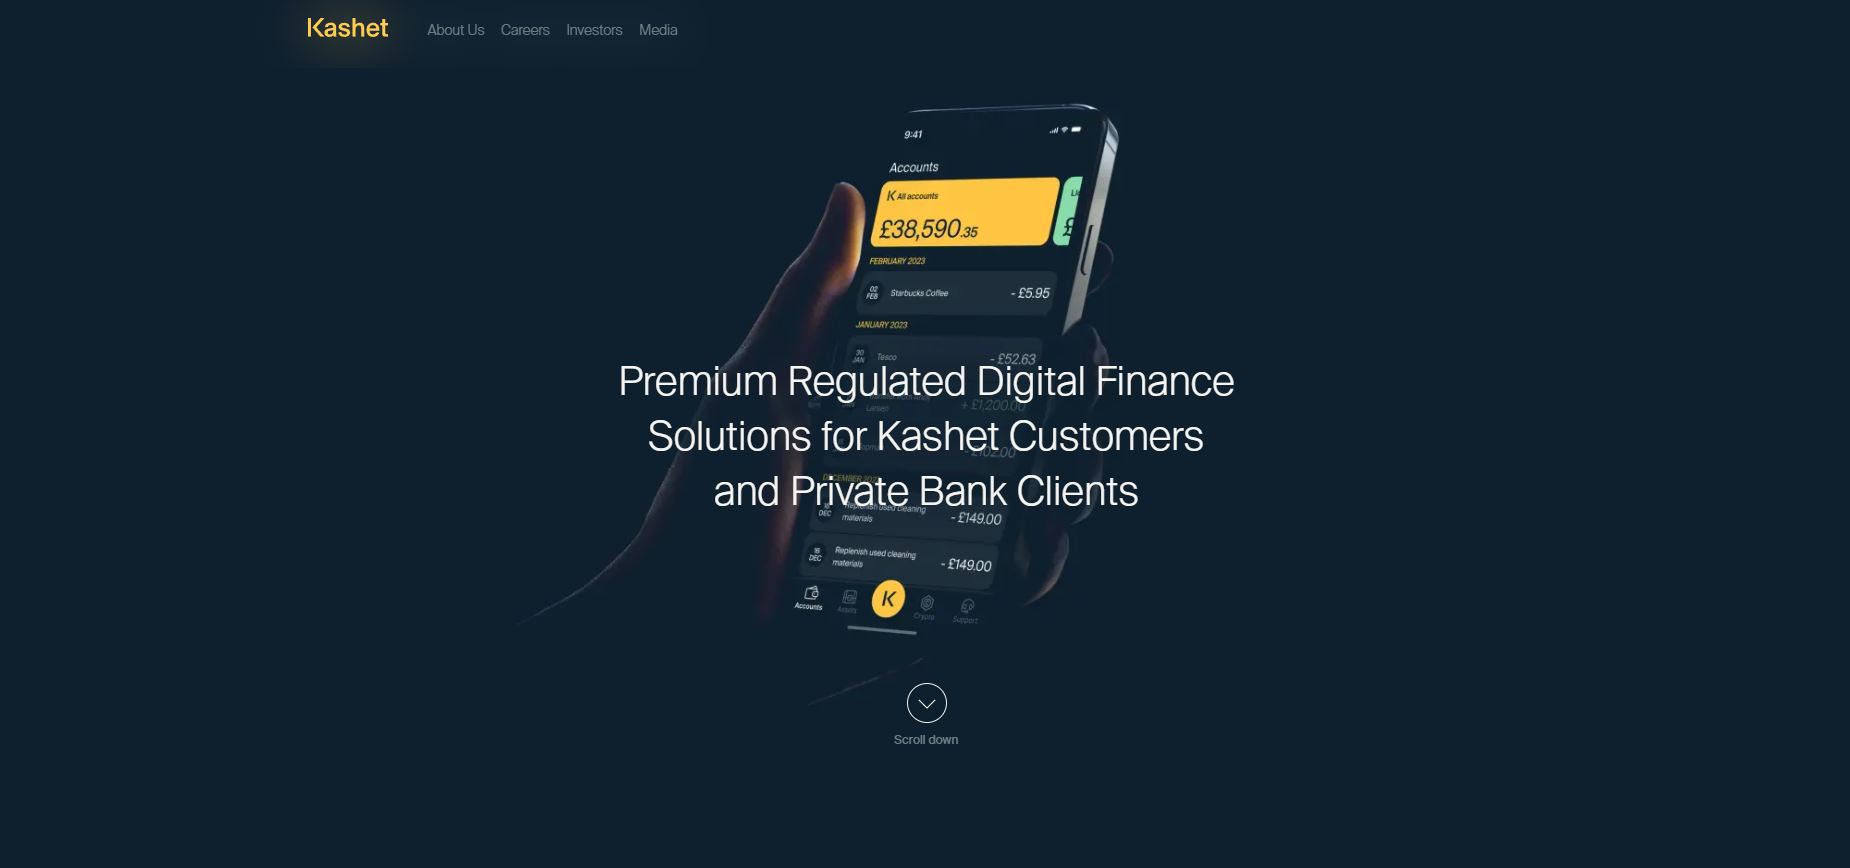 With $6.2 million in funding, Kashet aims to provide high-quality digital finance solutions